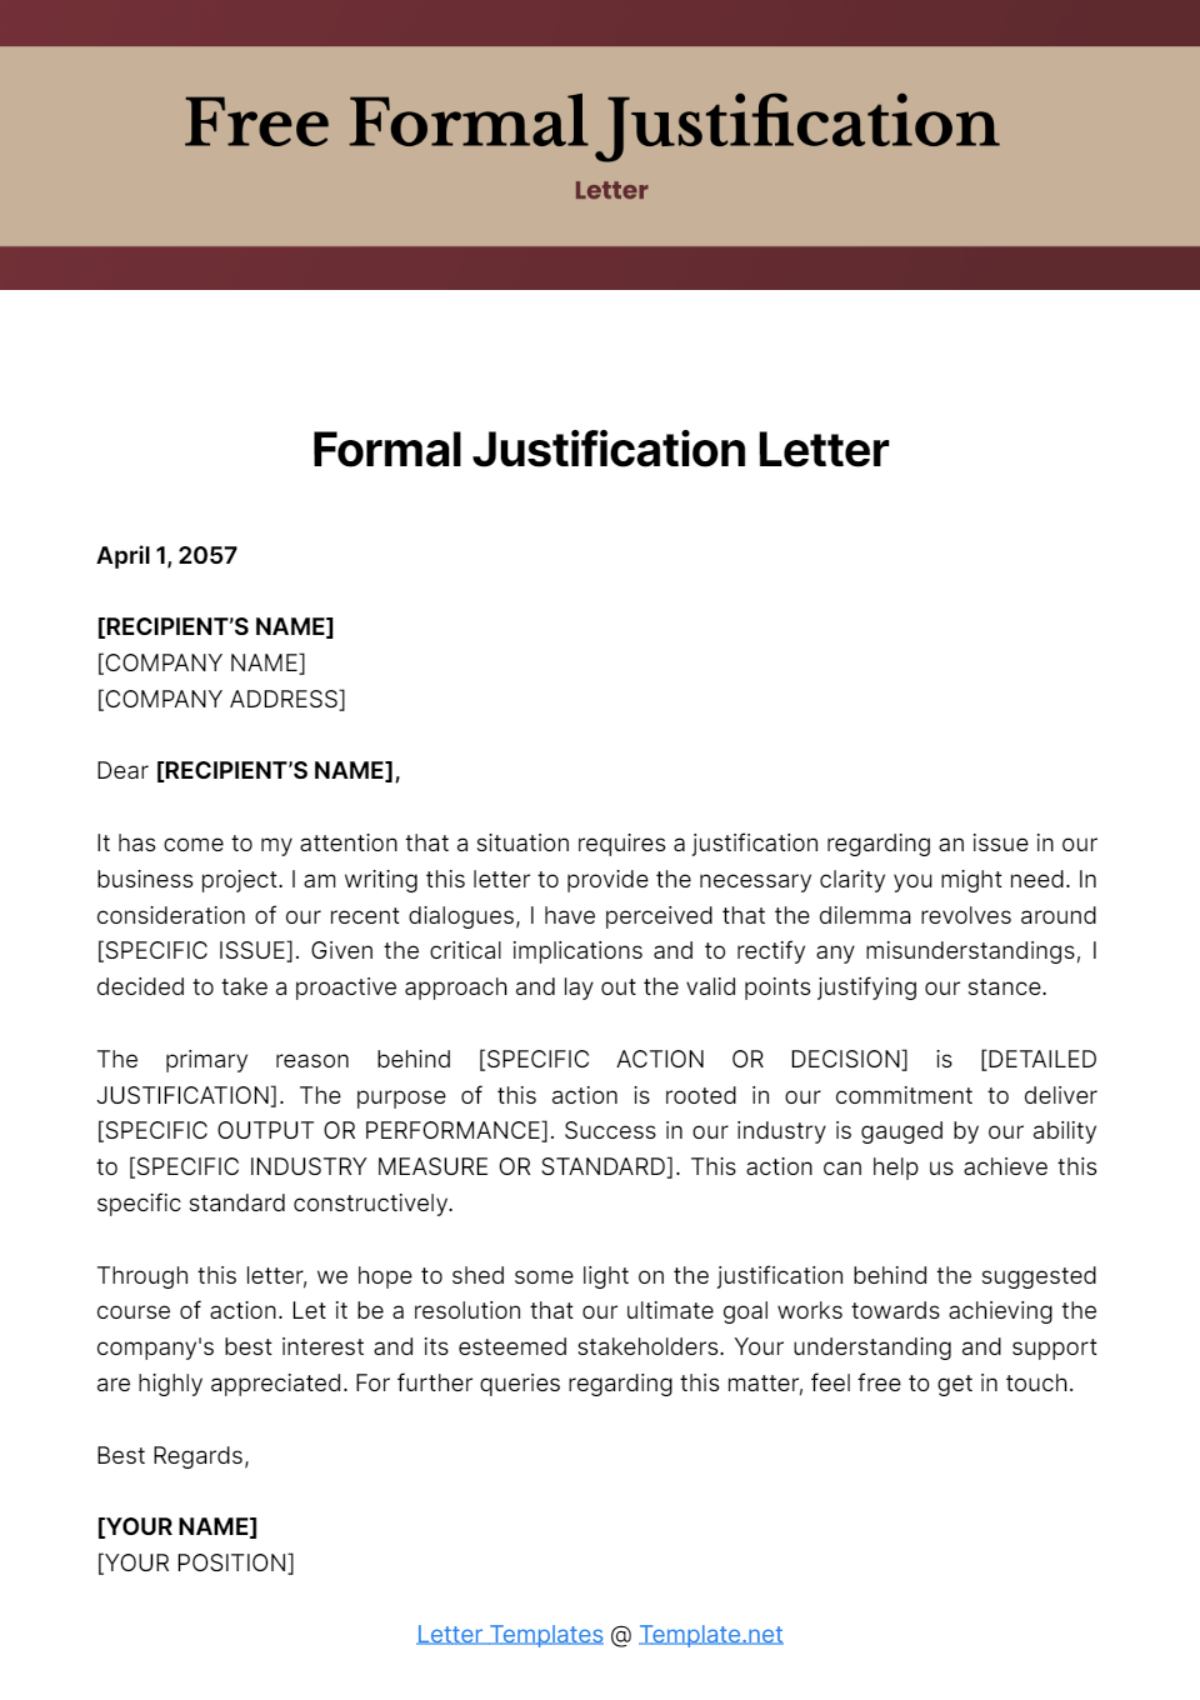 Free Formal Justification Letter Template